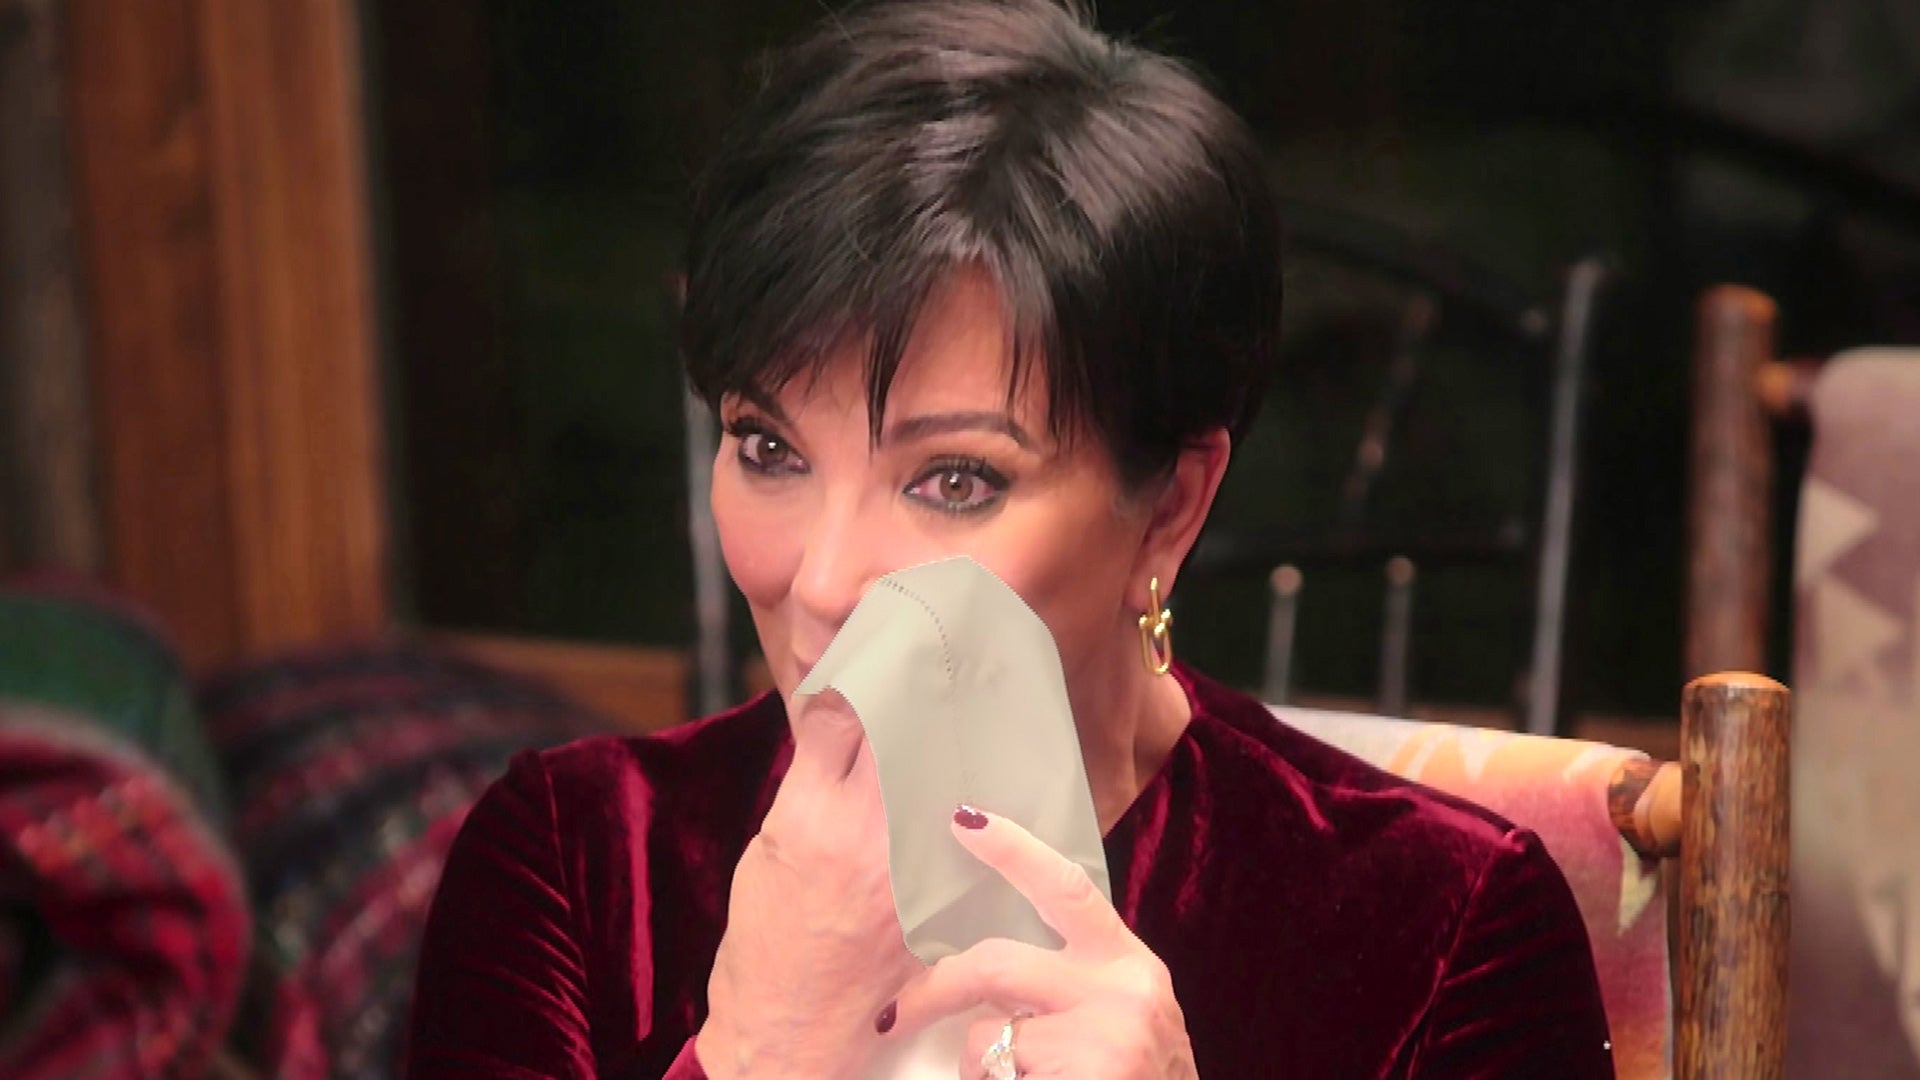 Kris Jenner In Tears Over Cancer Scare on 'The Kardashians'